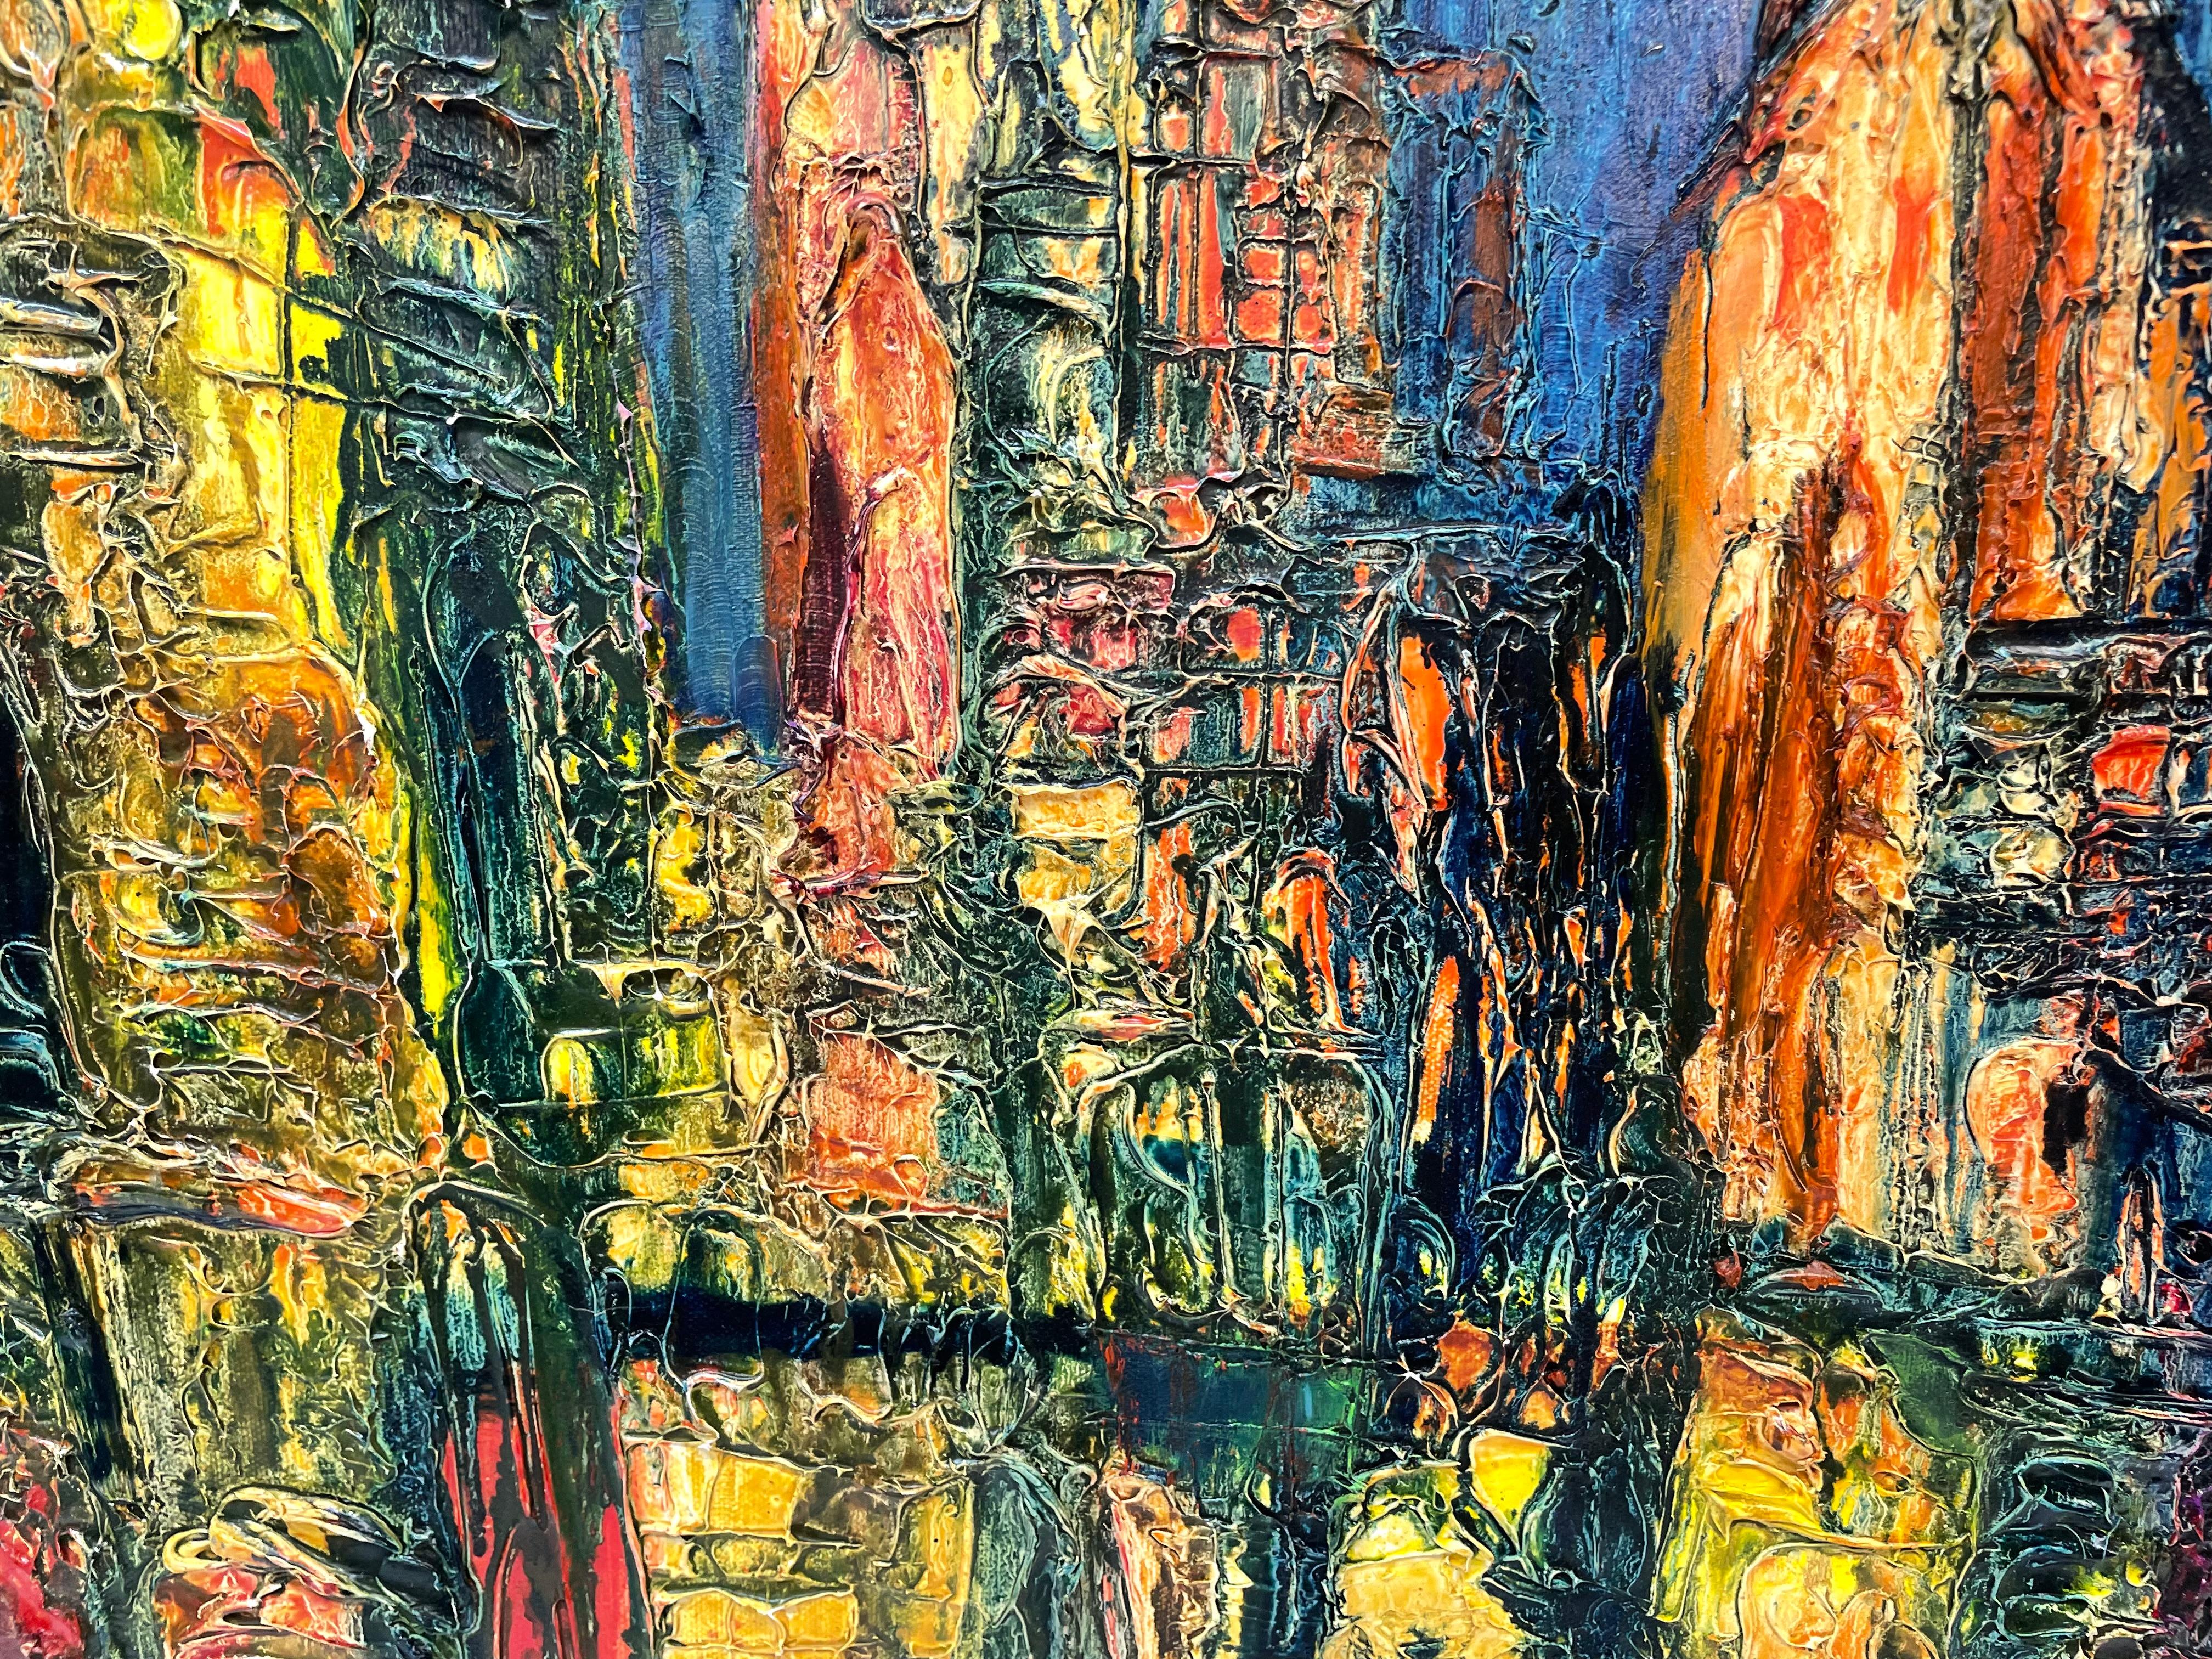 New York at Night - Painting by Lucette Barth